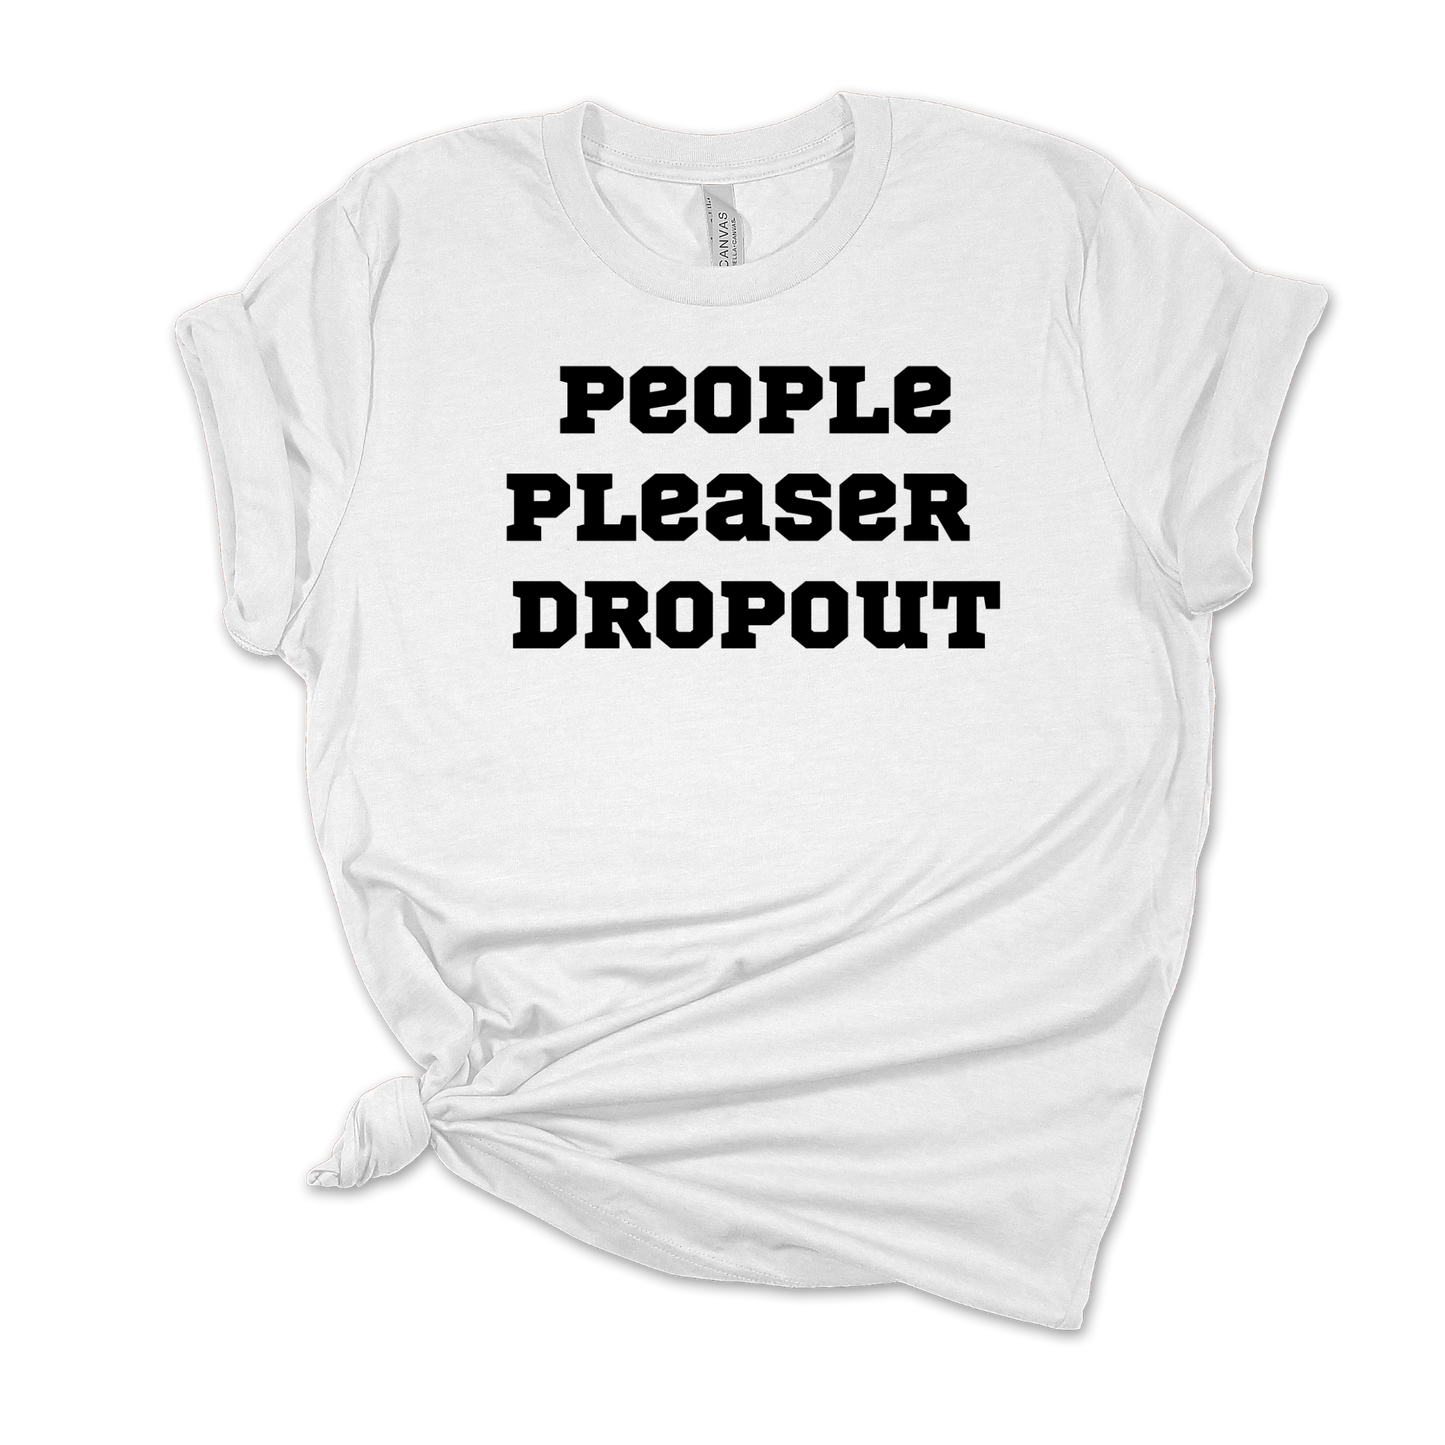 People Pleaser Dropout